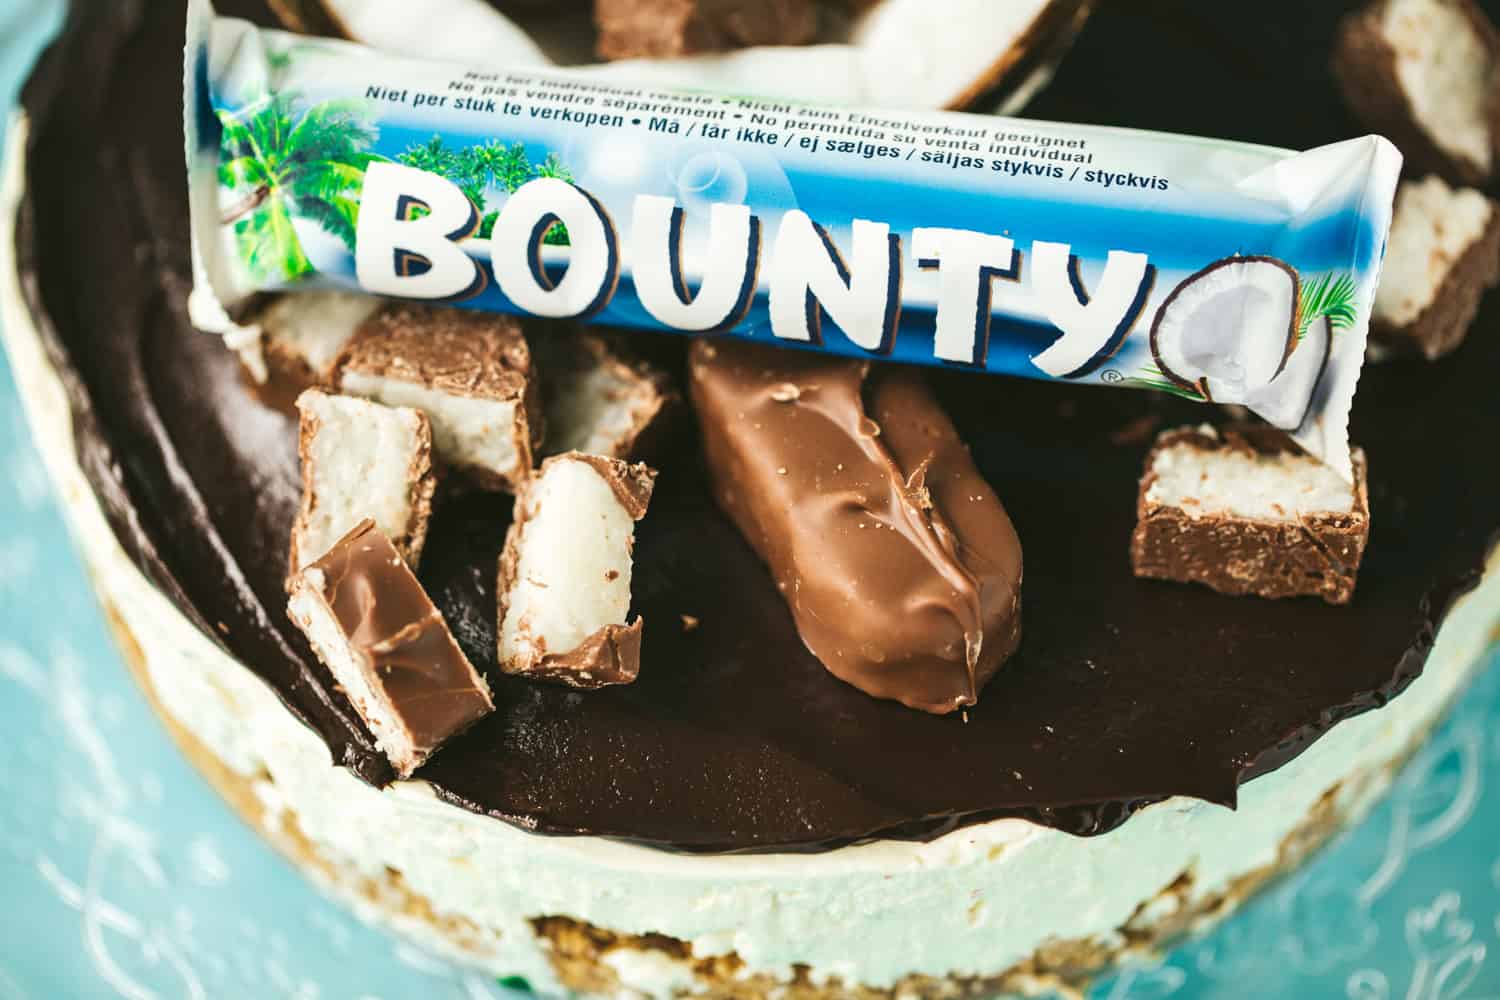 A cheesecake with chocolate ganache on top, half a coconut and Bounty bars are decorating the cheesecake